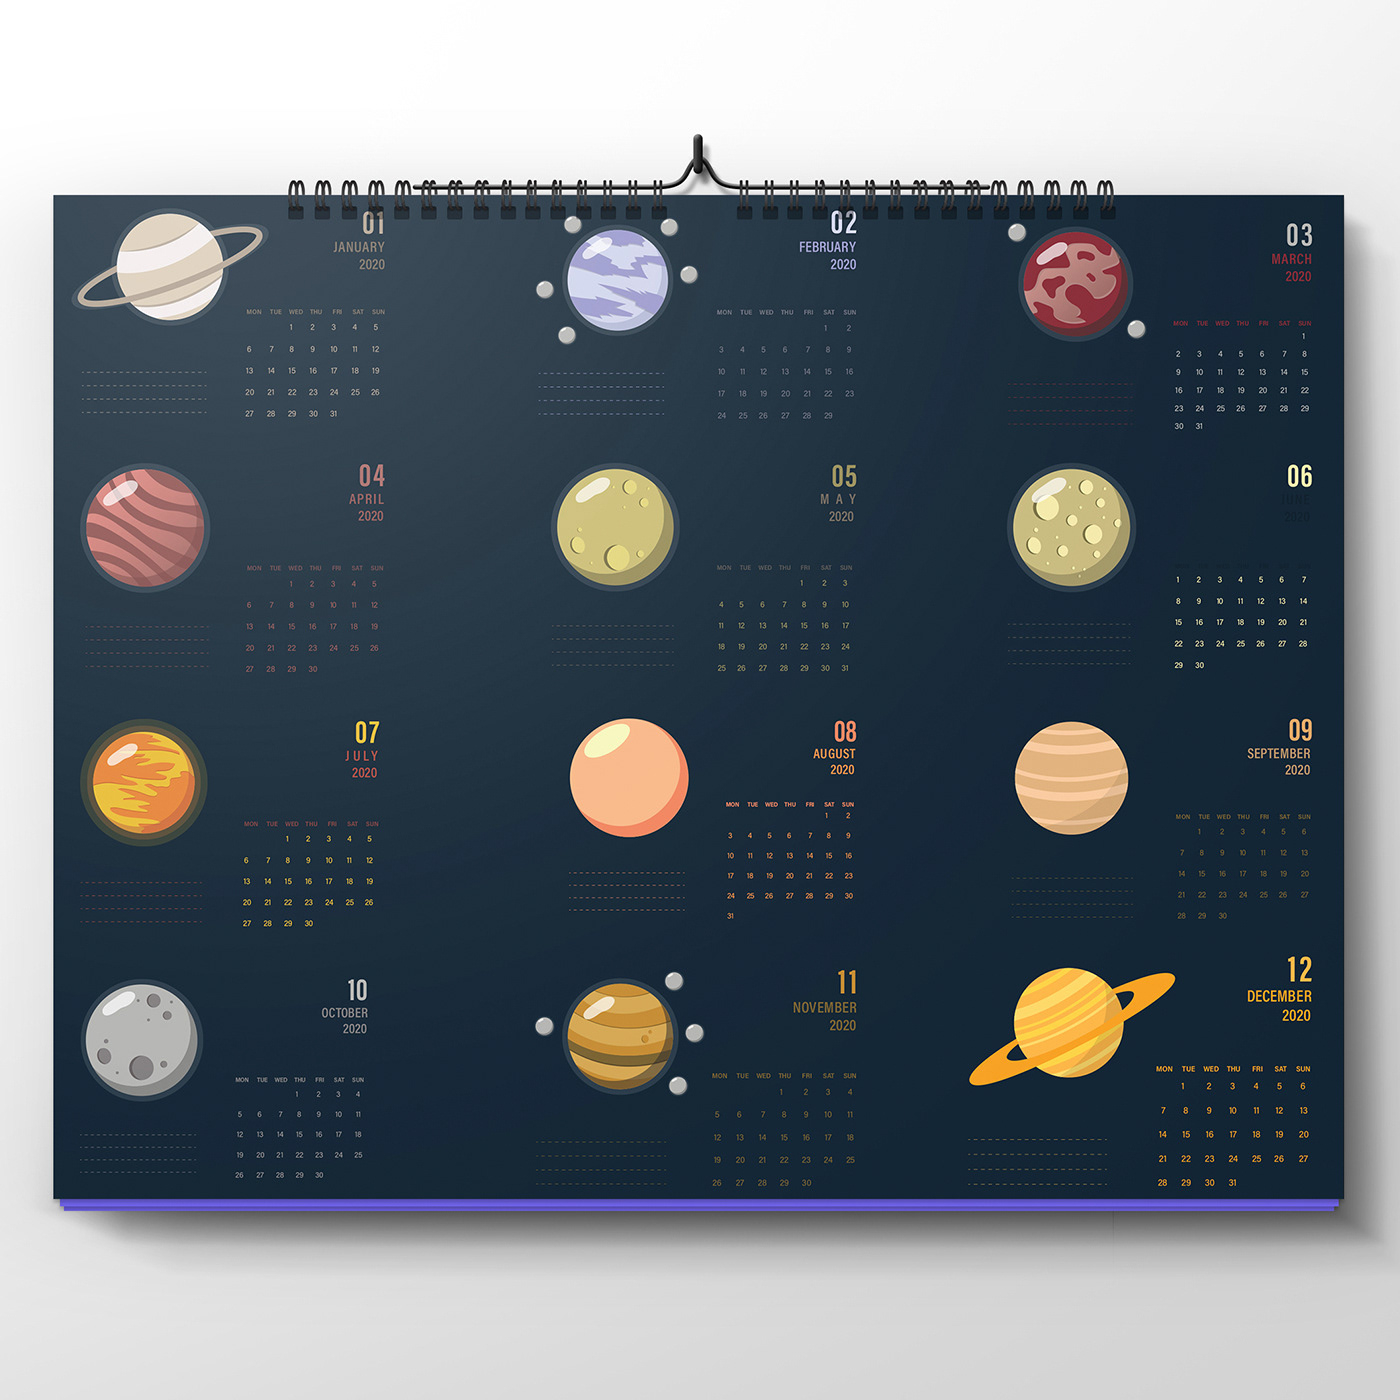 2020 Planets Of Zodiac Signs Calendar On Behance English Calender Zodia Sign